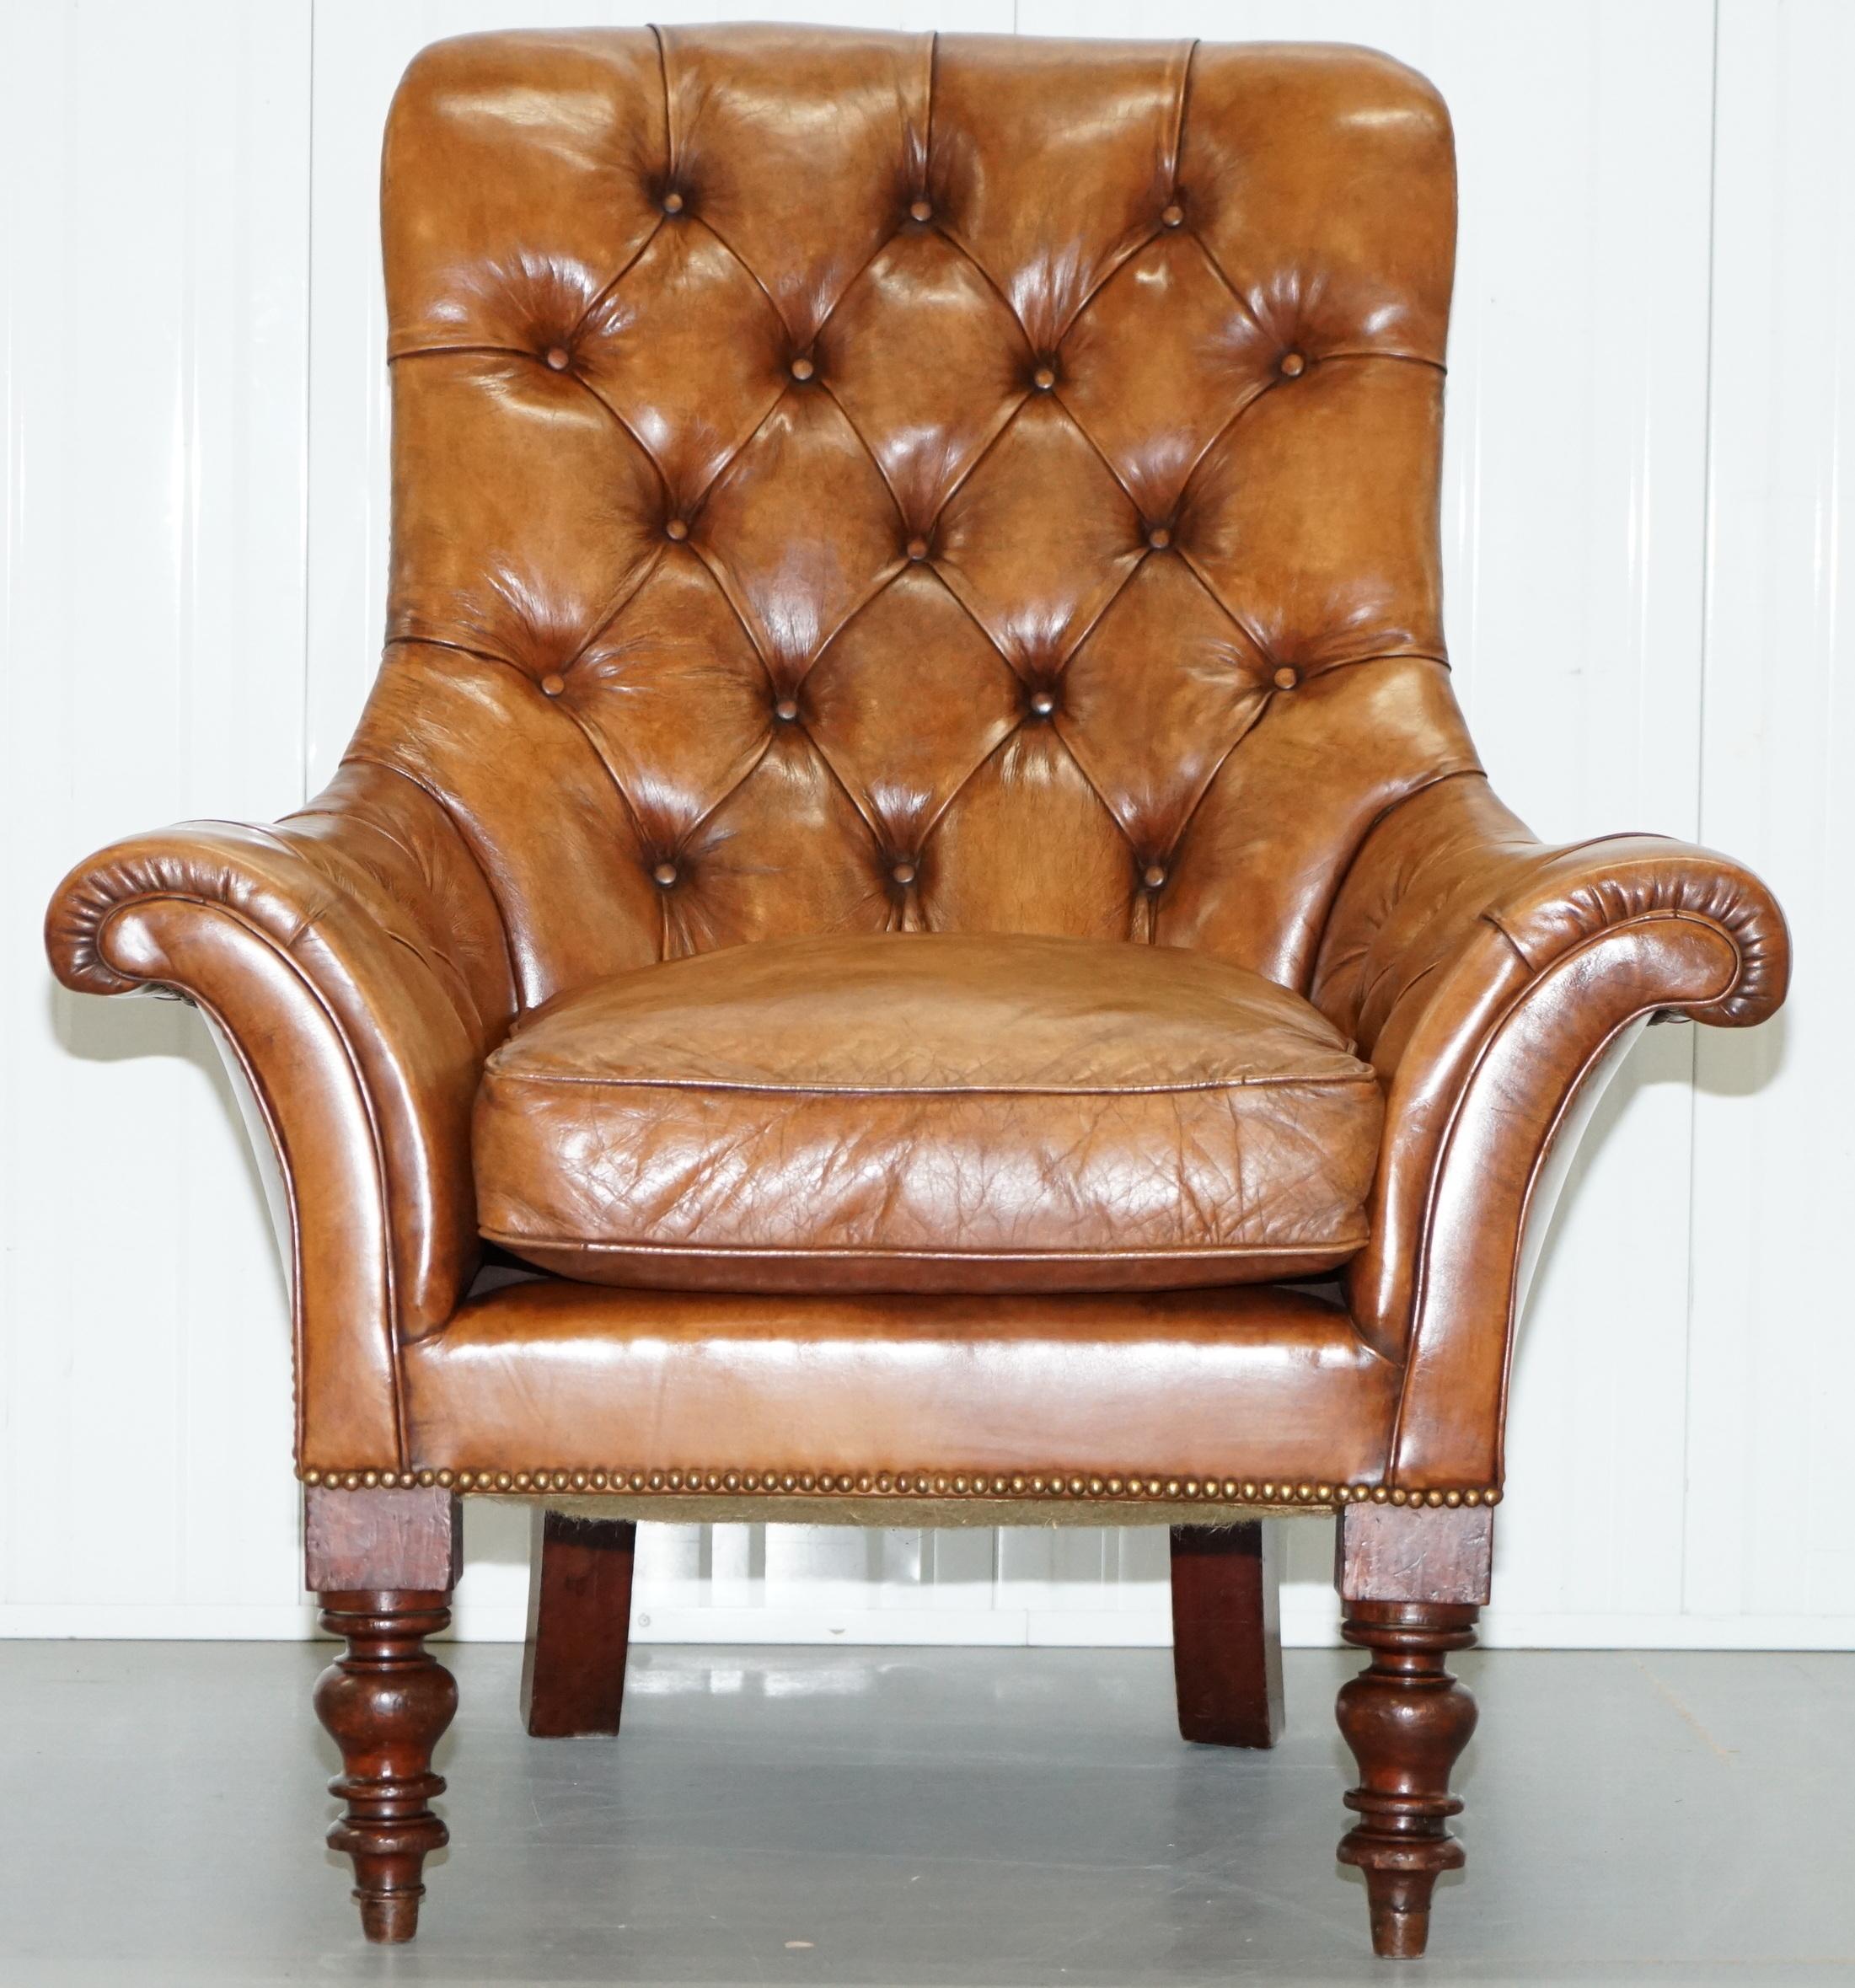 We are delighted to offer for sale this stunning oversized original Victorian Chesterfield hand dyed brown leather library reading armchair

This piece was fully restored in the last couple of years to include new full aniline leather upholstery,